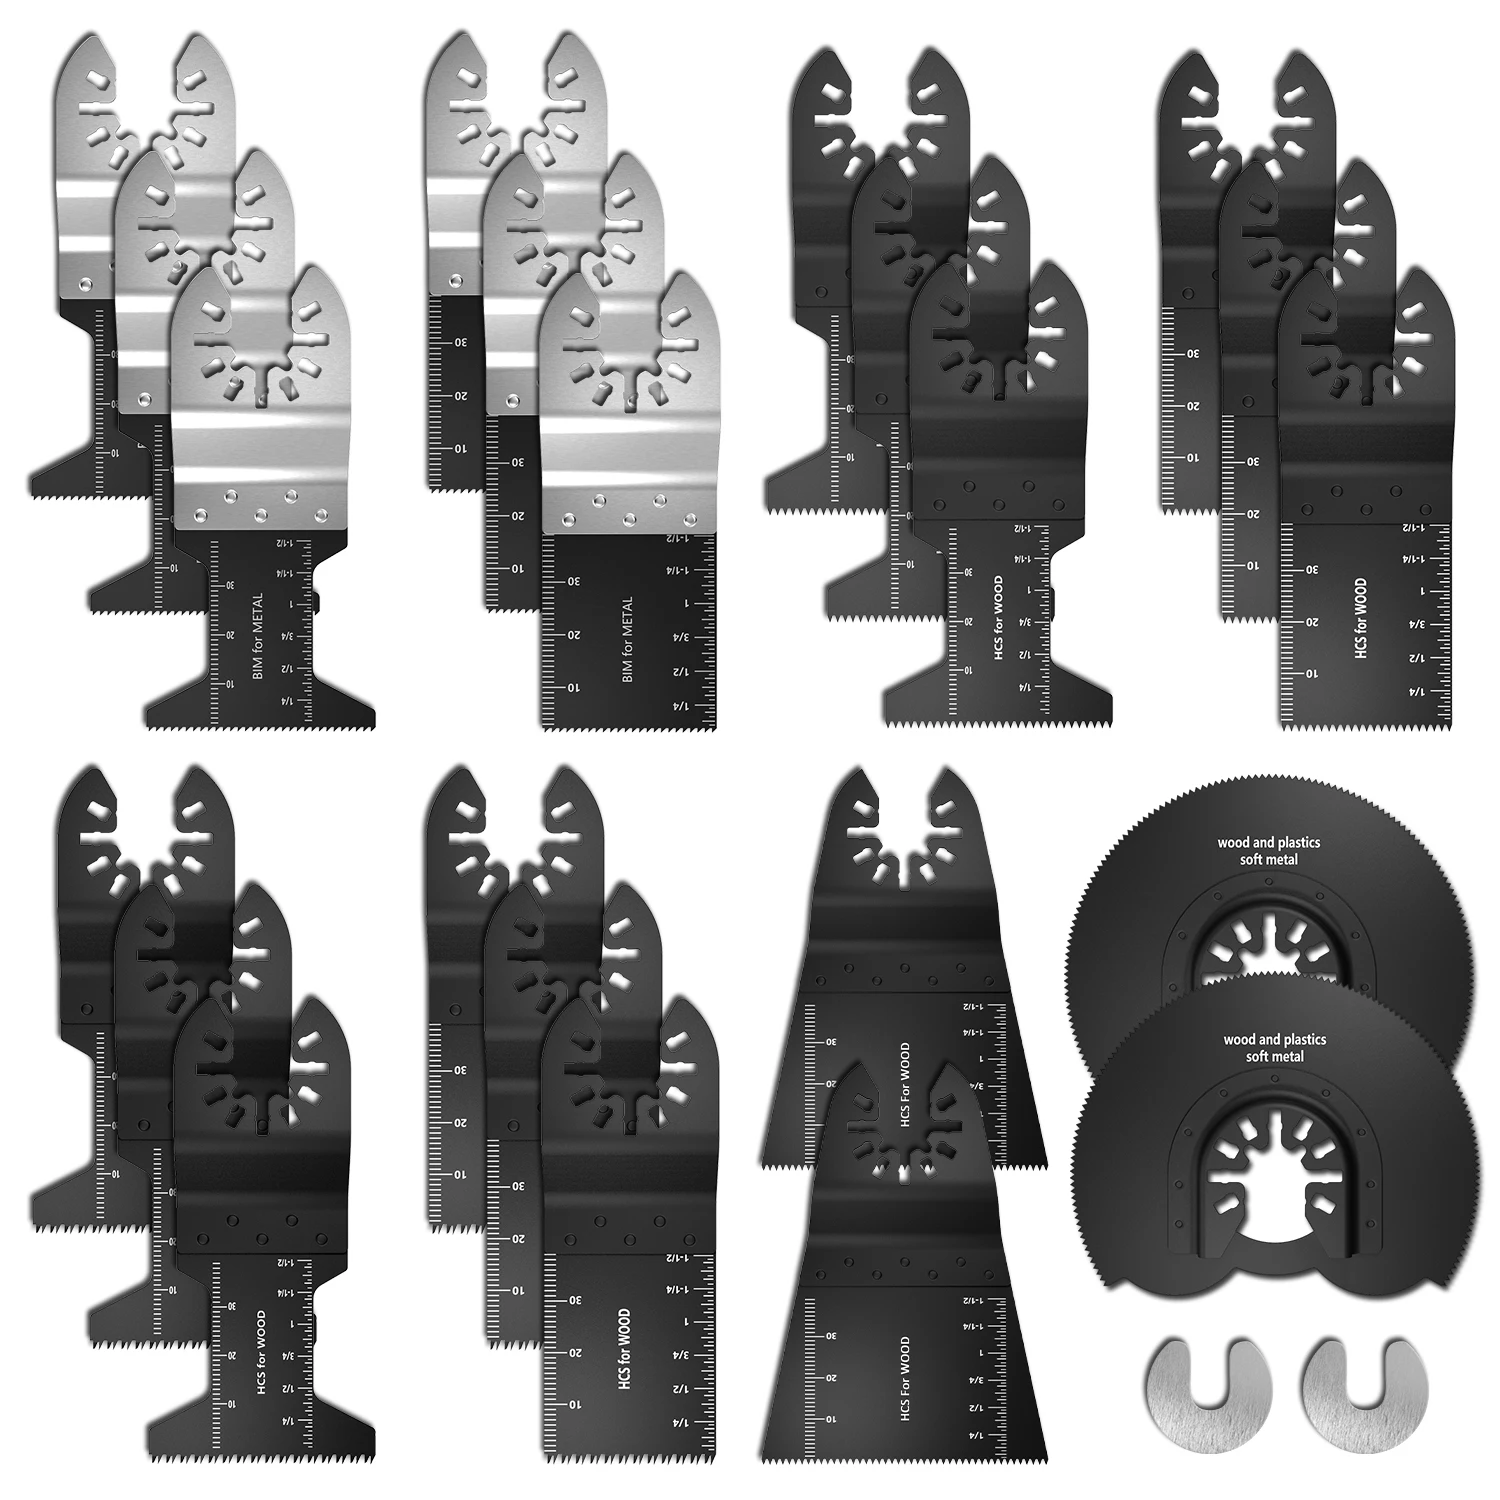 

22 Pcs Multi-Function HCS Precision Oscillating Saw Blade Multitool Saw Blades For Renovator Power Cutting Woodworking Tools